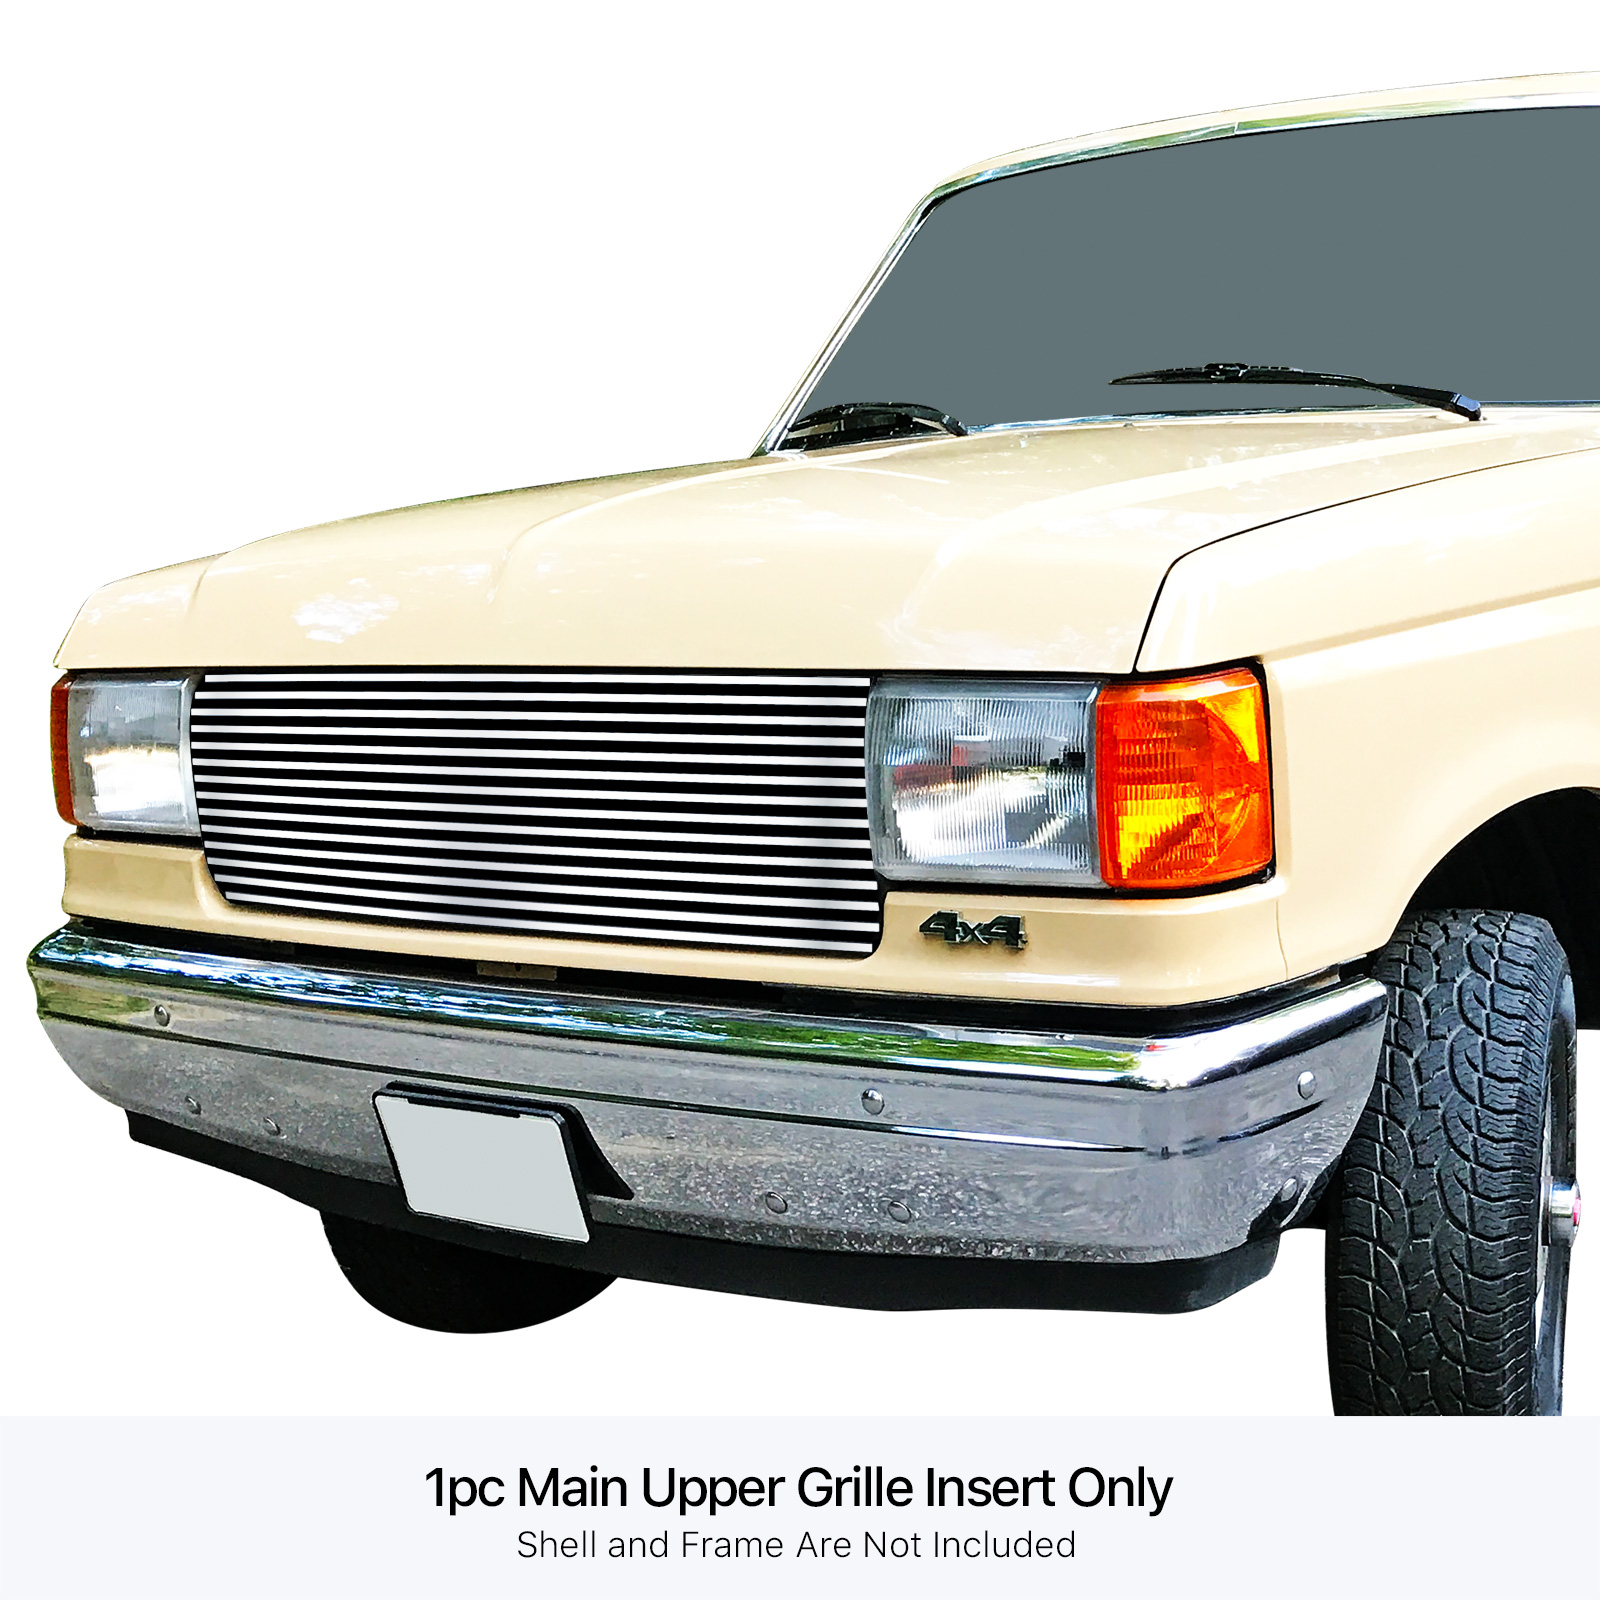 1987-1991 Ford Bronco /1987-1991 Ford F-150 /1987-1991 Ford F-250 /1987-1991 Ford F-350 MAIN UPPER Stainless Steel Billet Grille